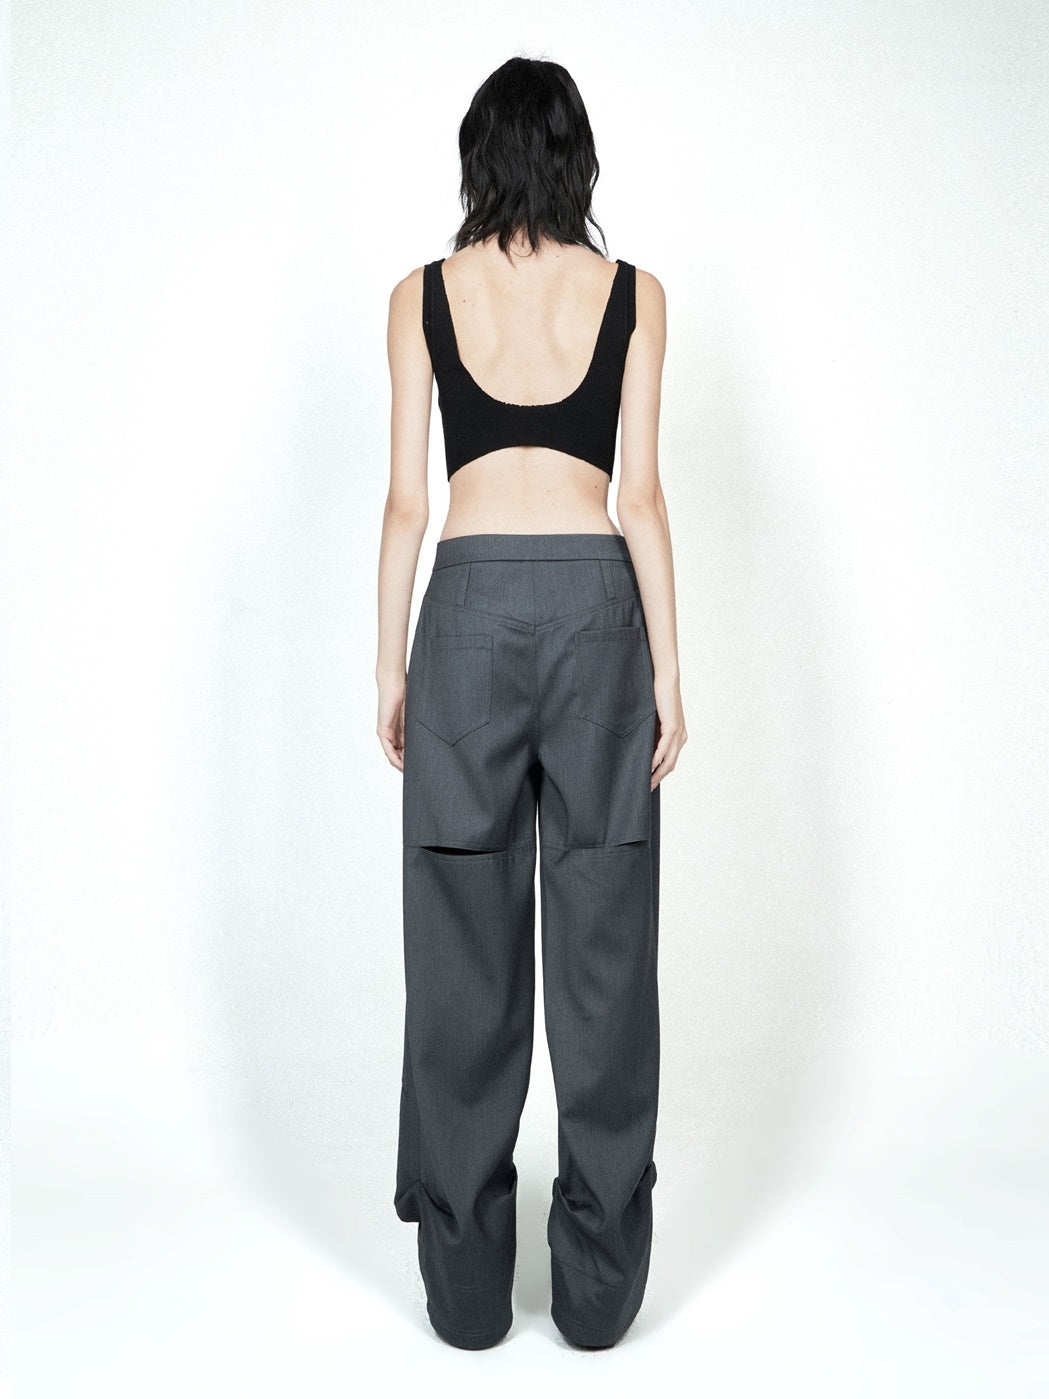 Relaxed Fit Trousers For Casual Comfort - chiclara